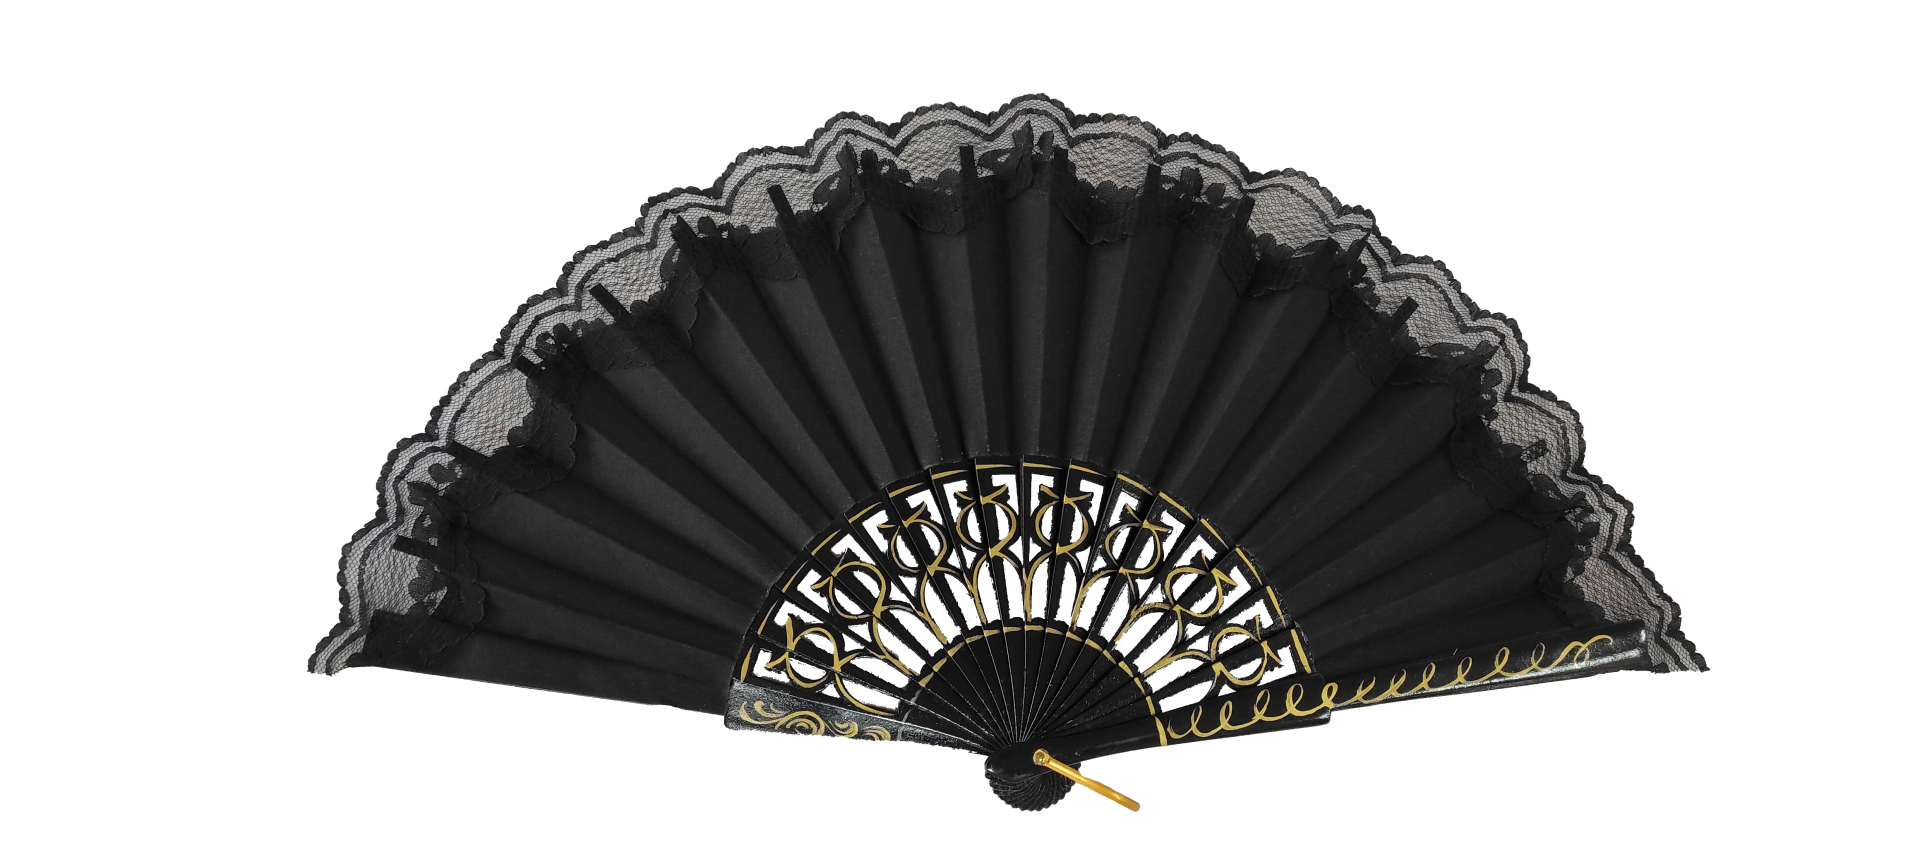 6313/1 NG - RJ - Wooden fan with lace - (black)